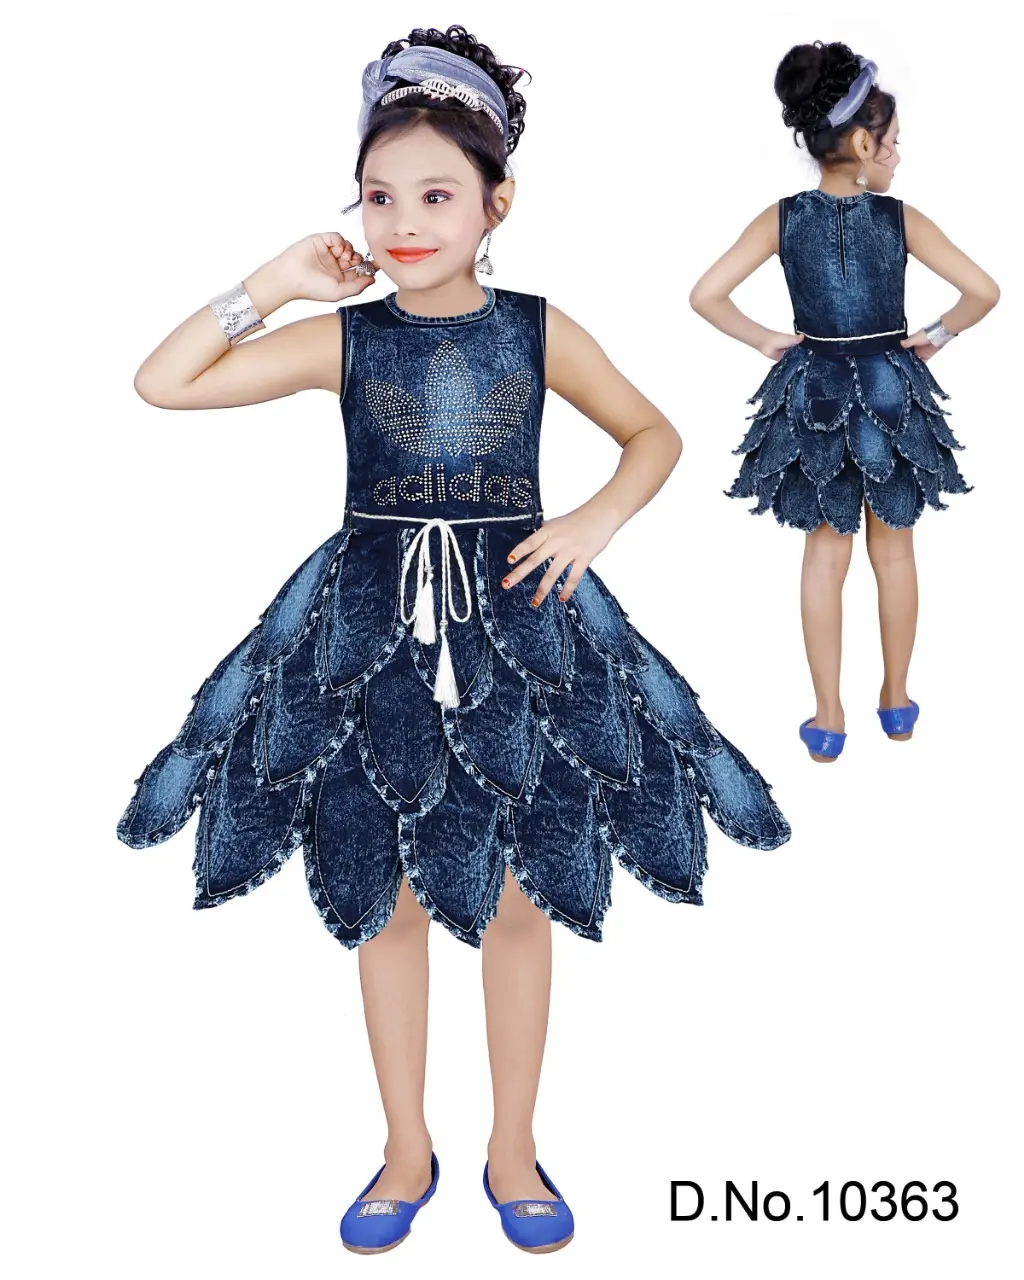 Stylish New Design Denim Frocks For Girls Dress 3 -10 Years Best Quality Most Trending In Stock Item Made In India